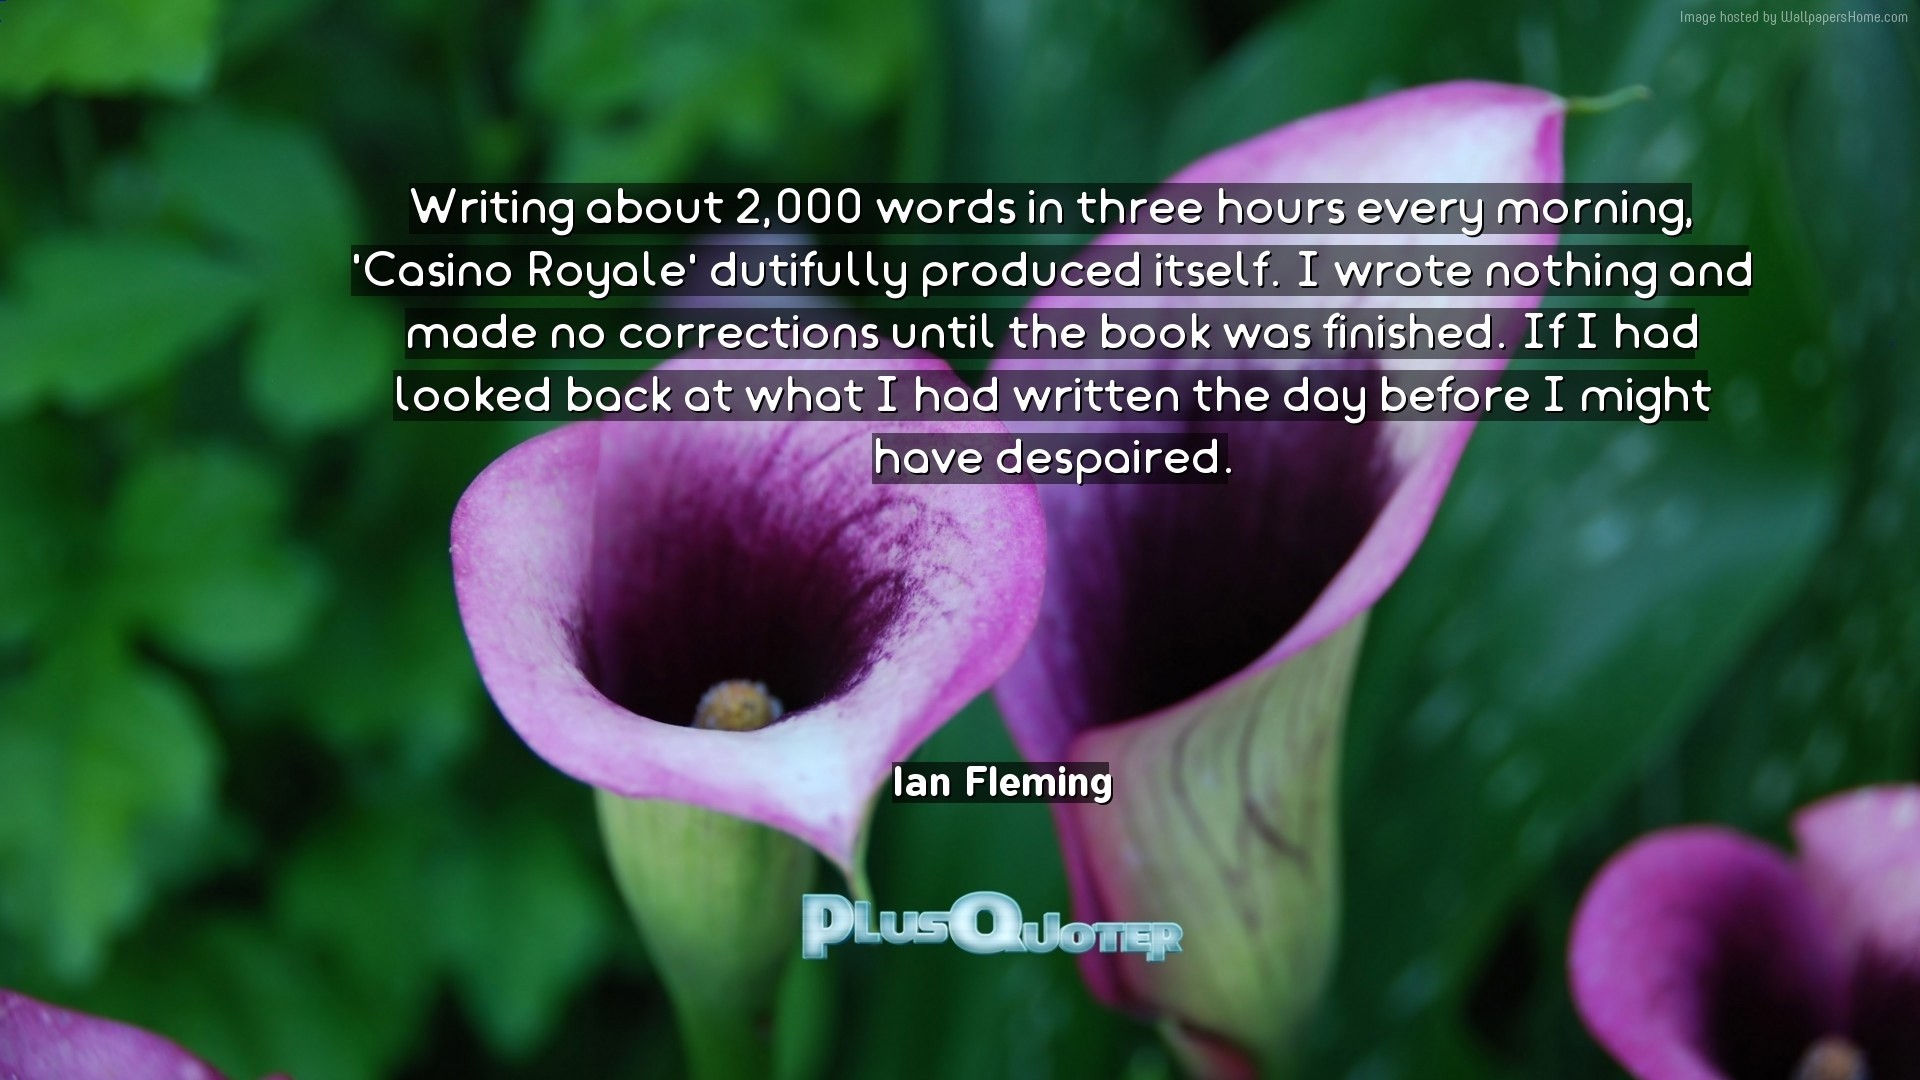 1920x1080 Download Wallpaper with inspirational Quotes- "Writing about 2,000 words in  three hours every morning